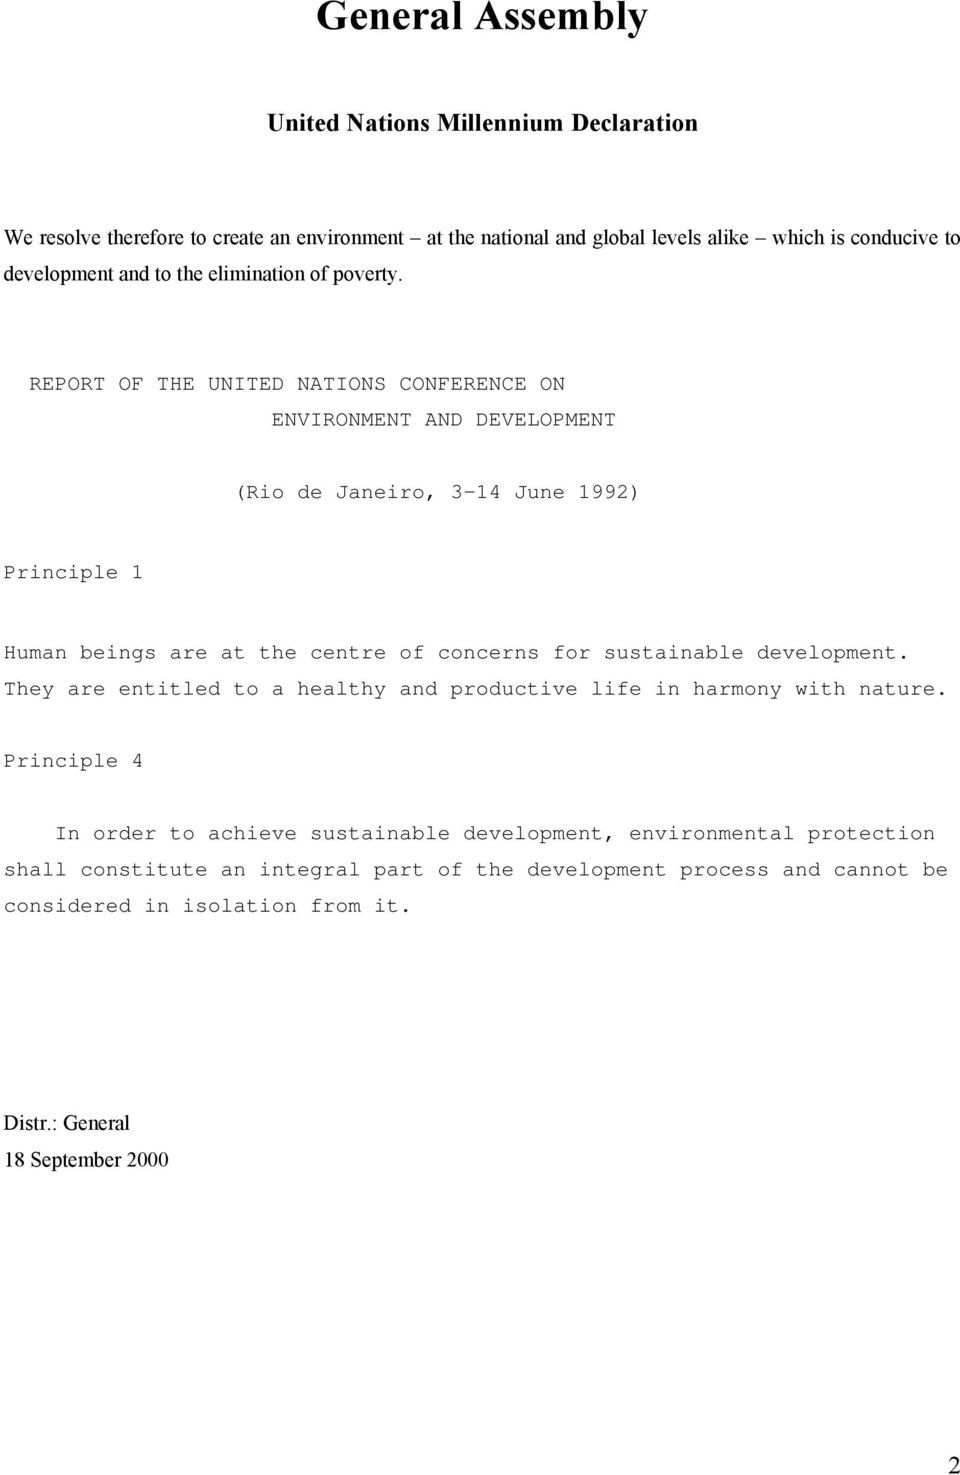 REPORT OF THE UNITED NATIONS CONFERENCE ON ENVIRONMENT AND DEVELOPMENT (Rio de Janeiro, 3-14 June 1992) Principle 1 Human beings are at the centre of concerns for sustainable